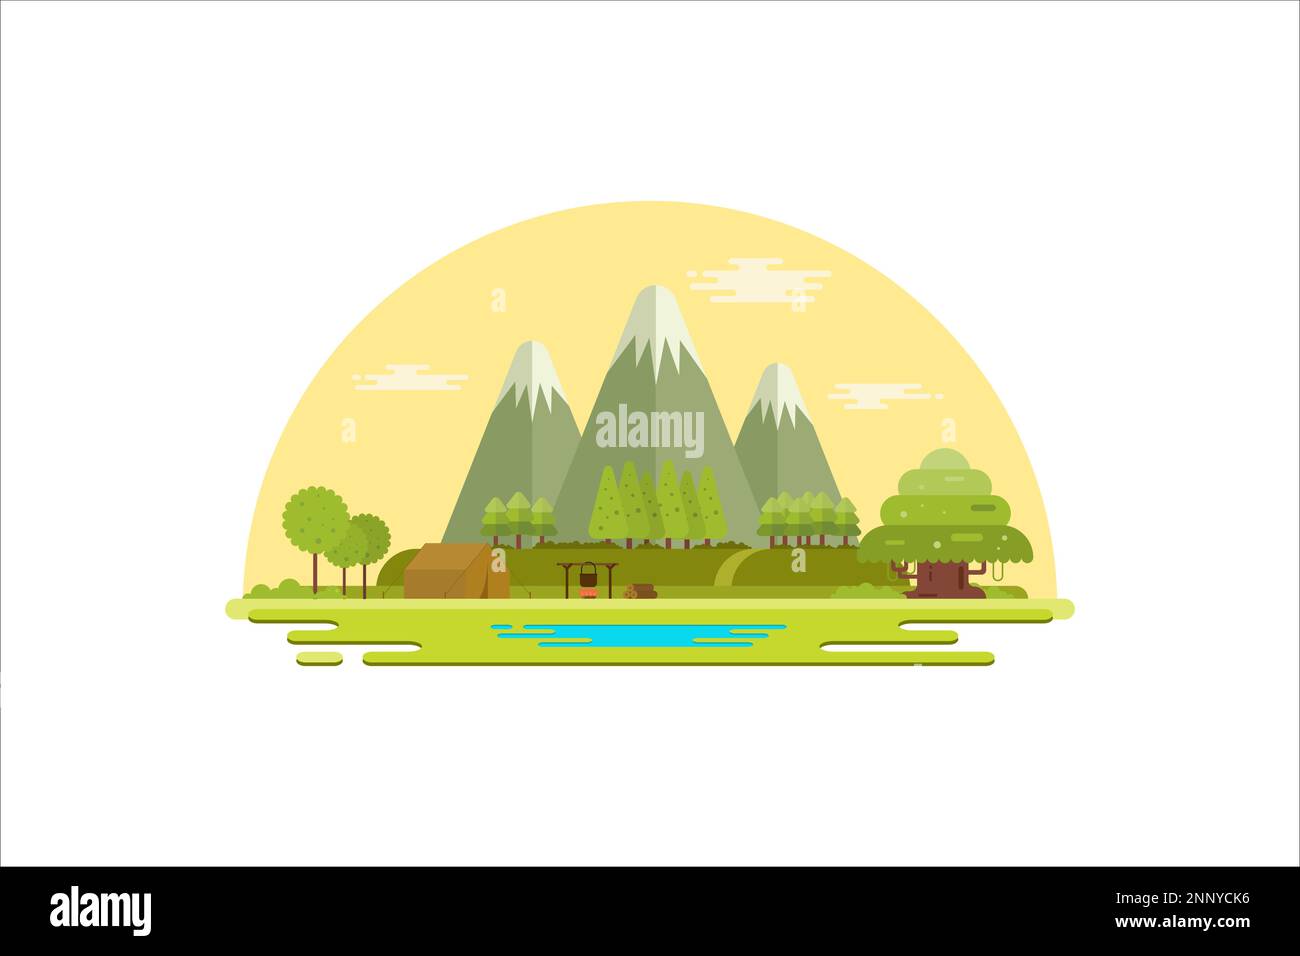 Vector illustration of camping around hills and lakes with a flat style design concept Stock Vector